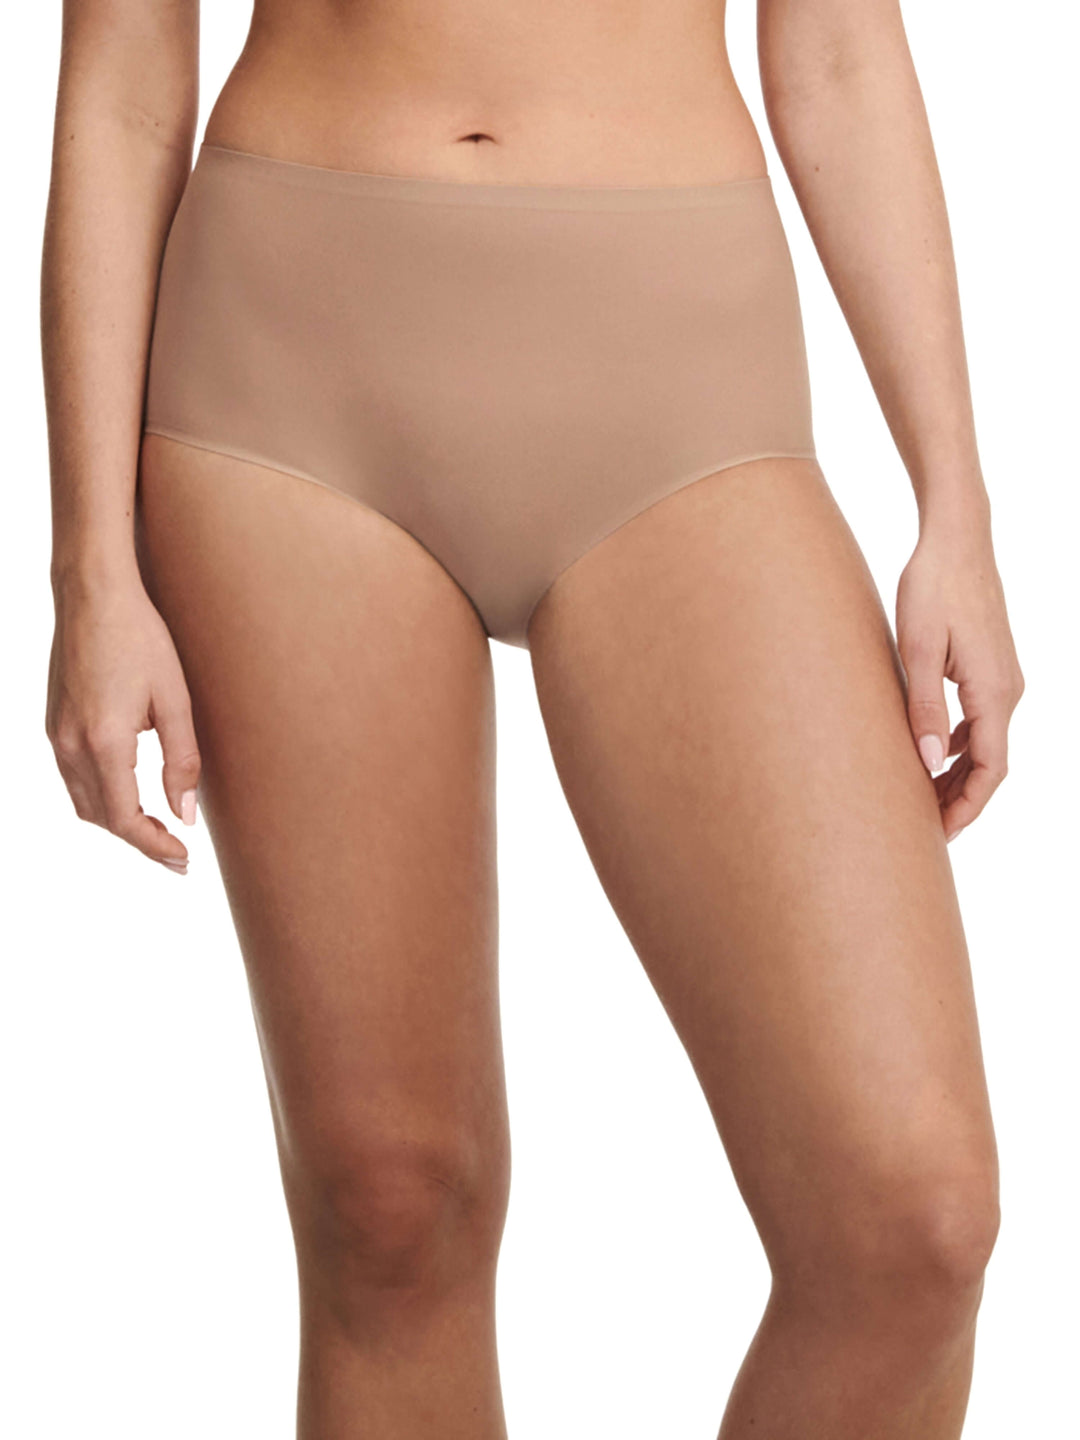  Customer reviews: Vassarette Women's Invisibly Smooth Brief  Panty 13383, Walnut, Large/7